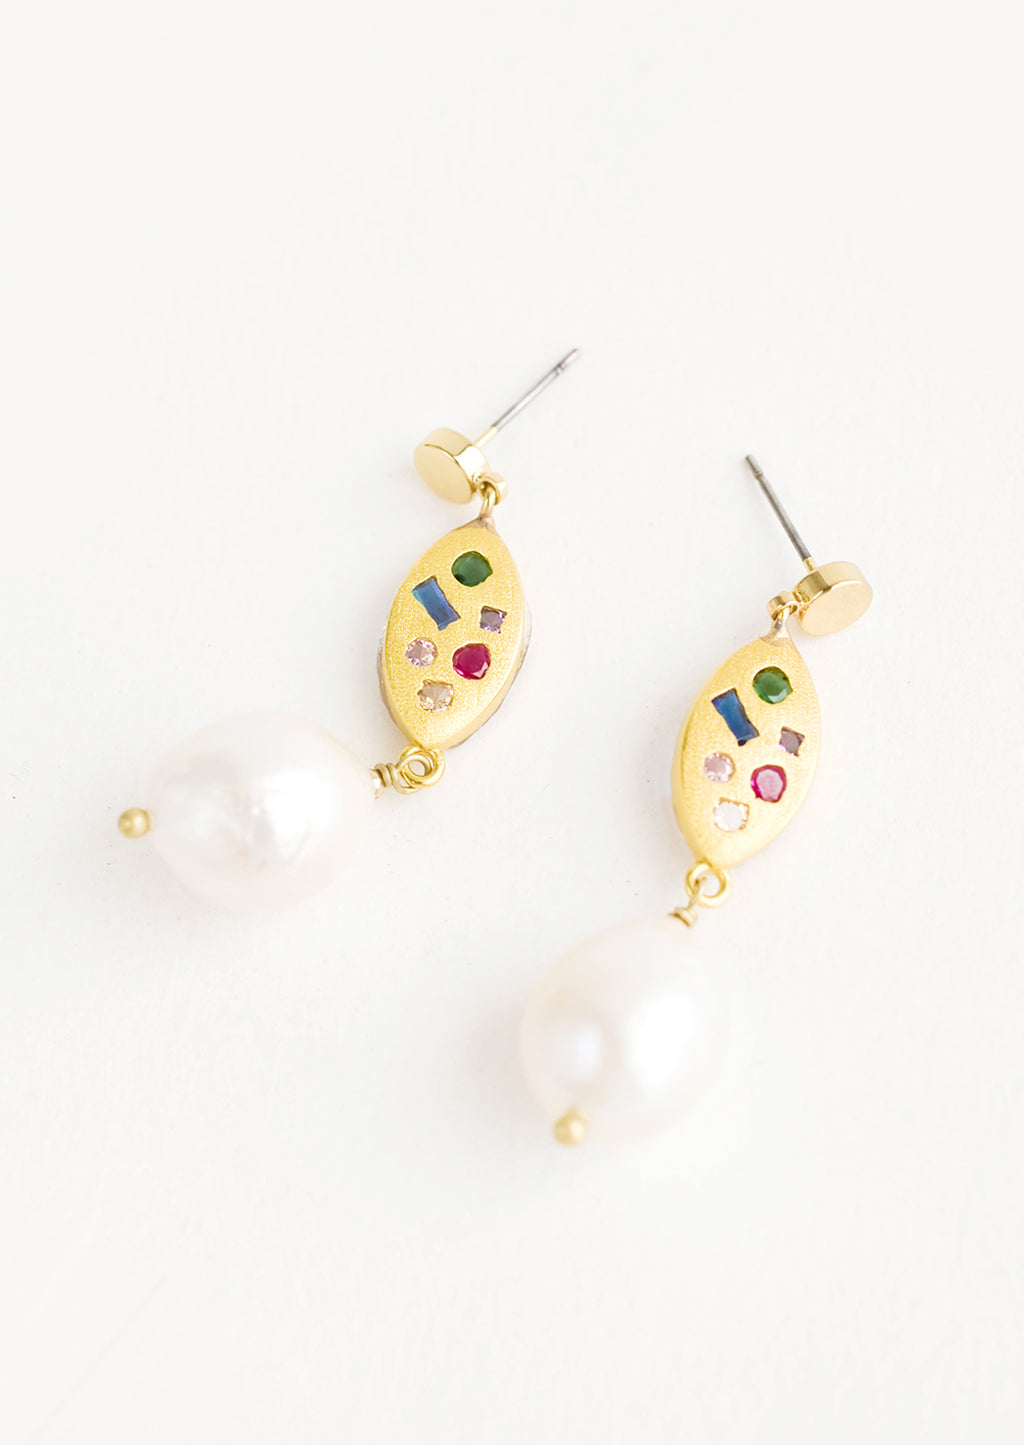 3: Dangle earrings with round gold post, gold baguette middle with embedded gemstones, pearl bead bottom